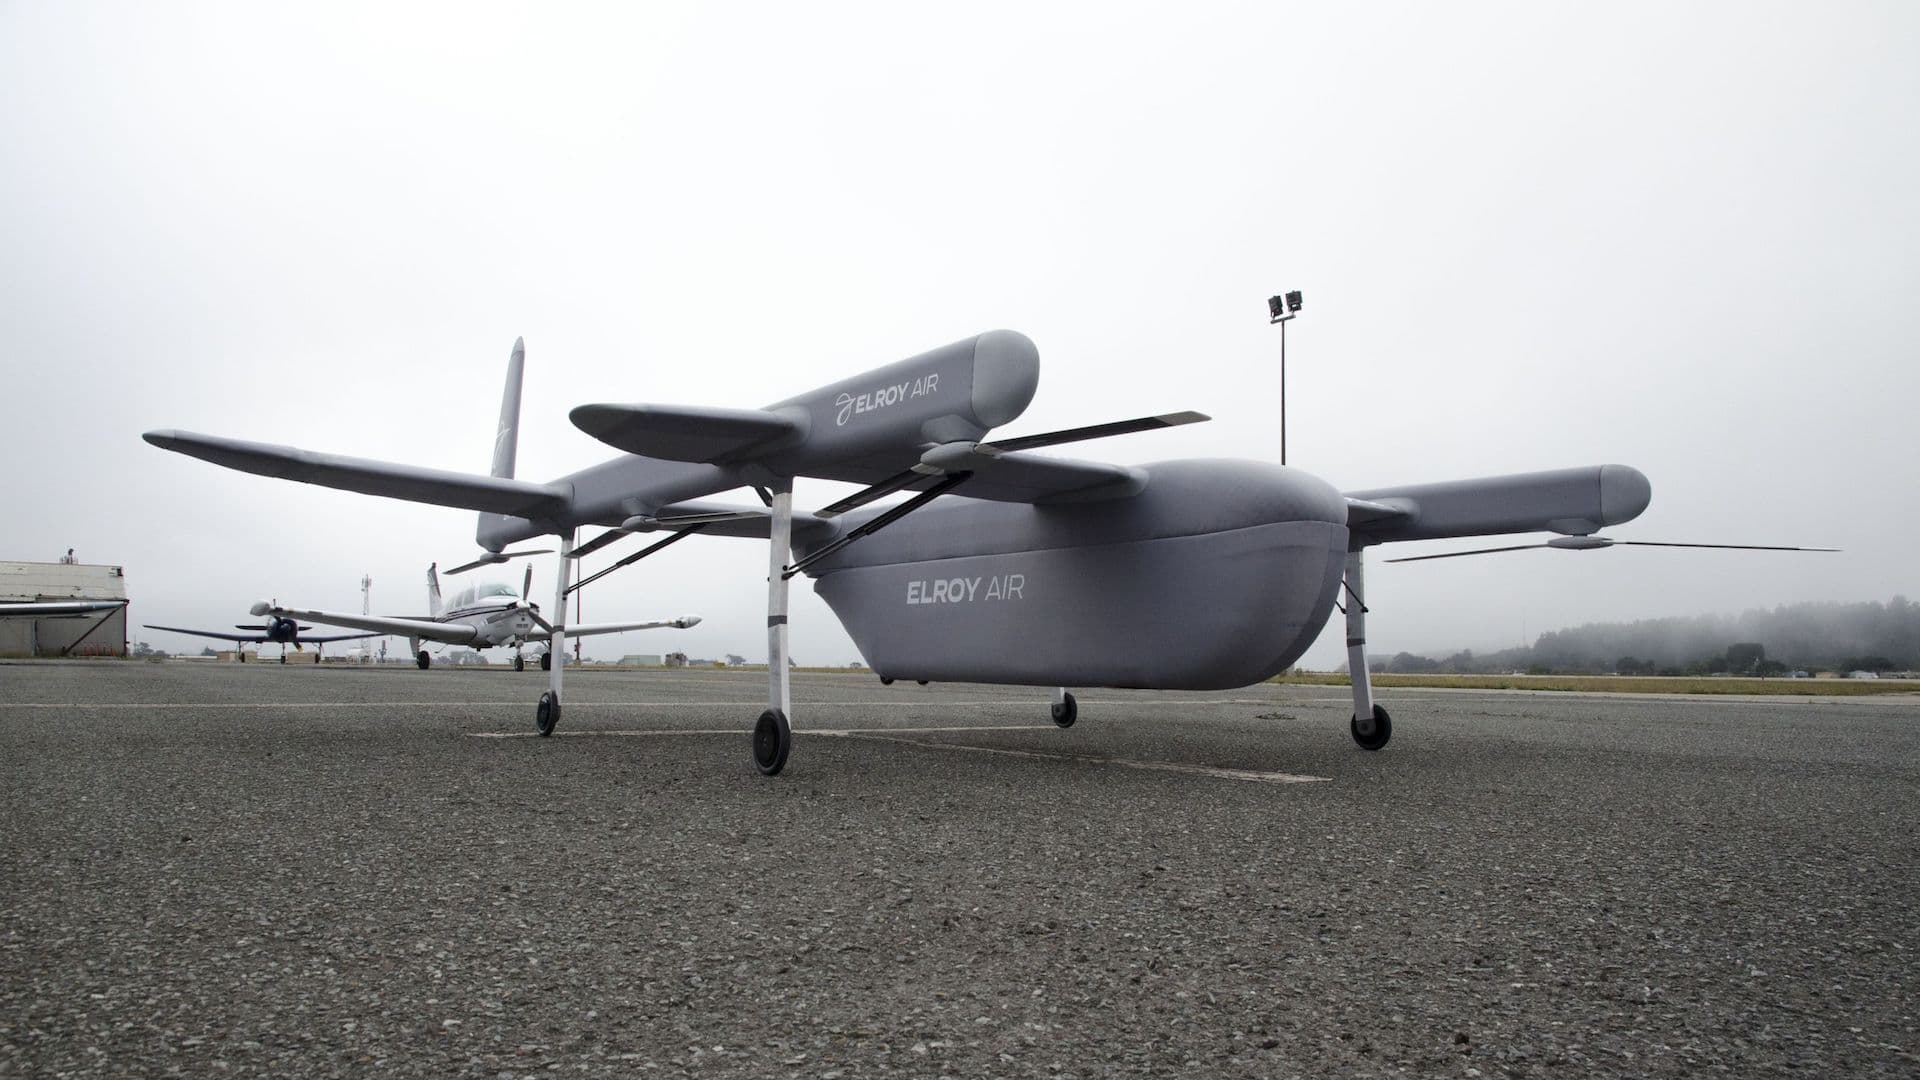 Elroy Air’s ‘Aluminum Falcon’ VTOL Drone Can Carry Up to 150 Pounds